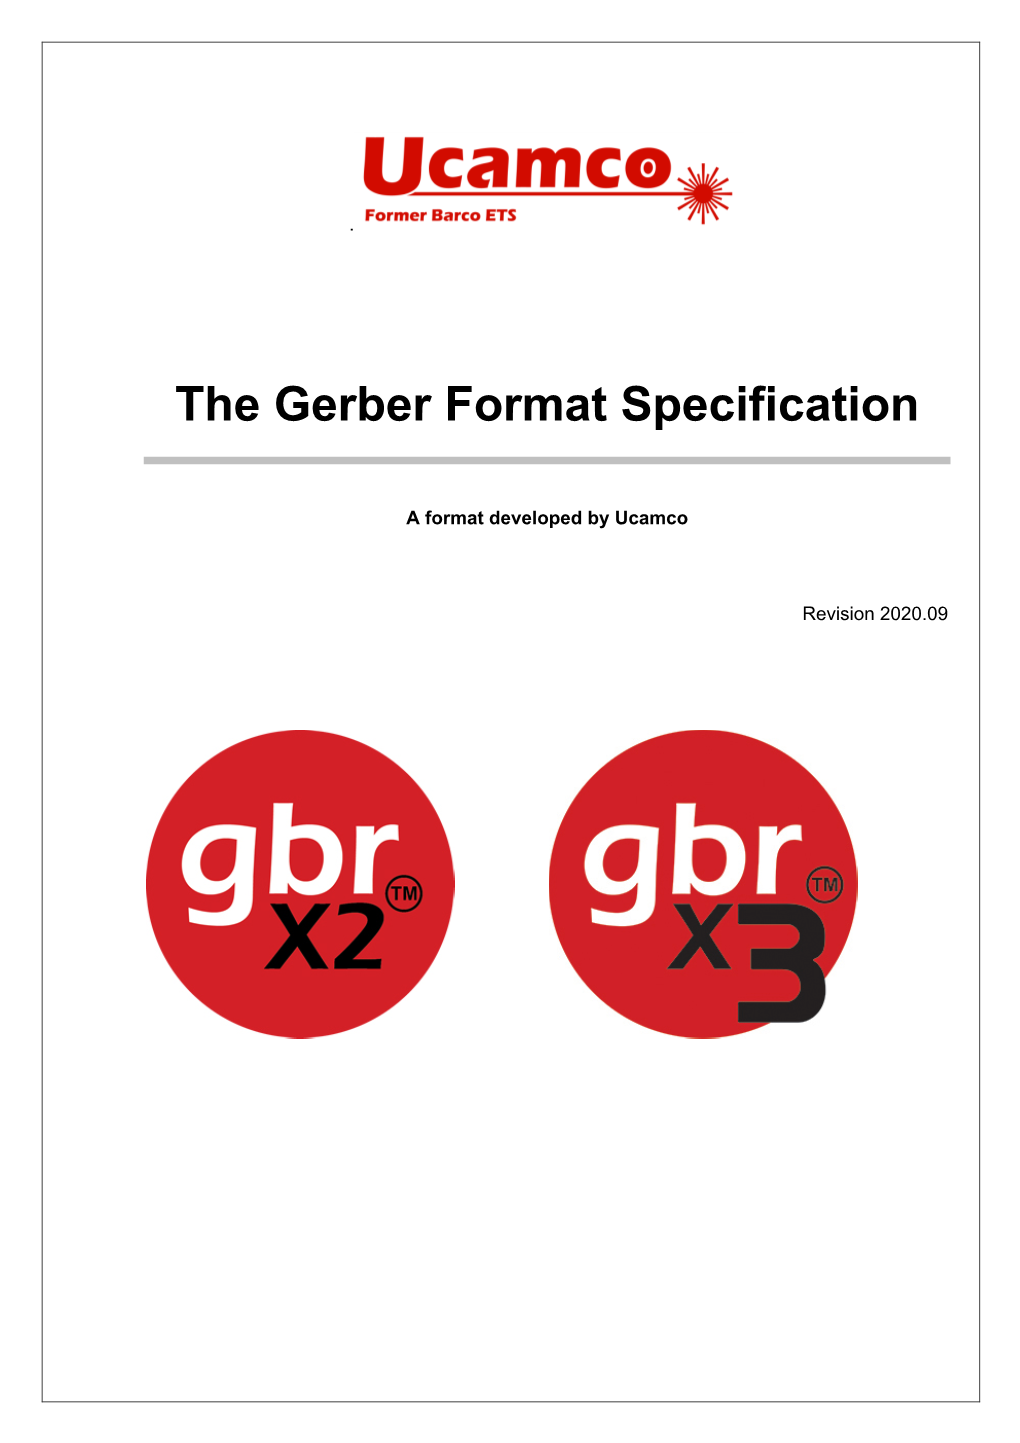 The Gerber File Format Specification Revision 2020.09.Docx